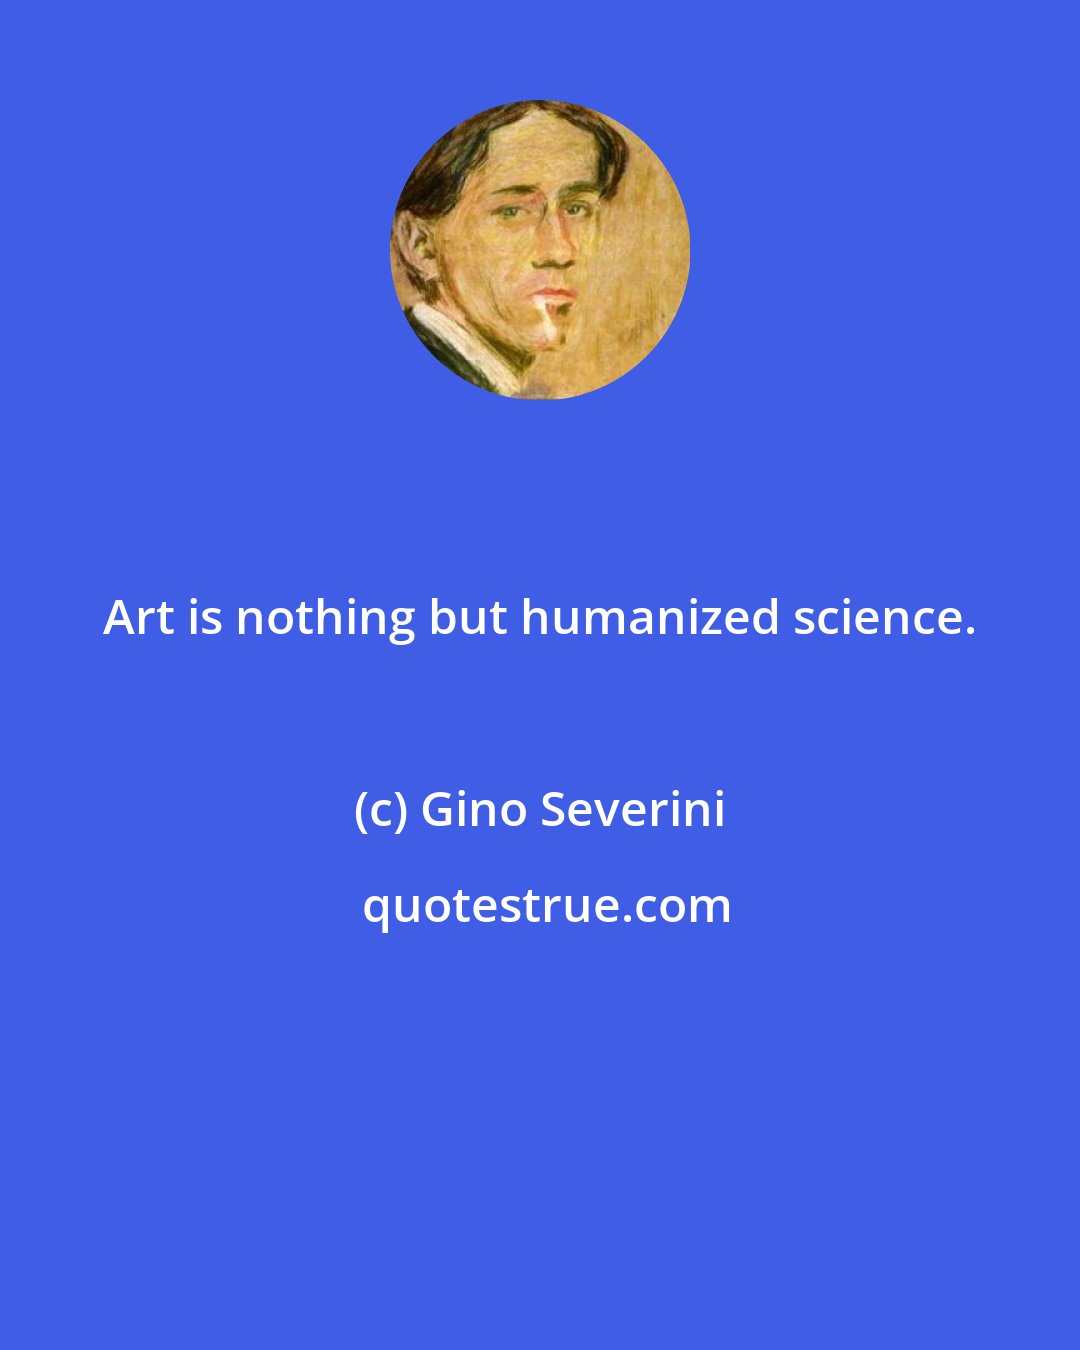 Gino Severini: Art is nothing but humanized science.